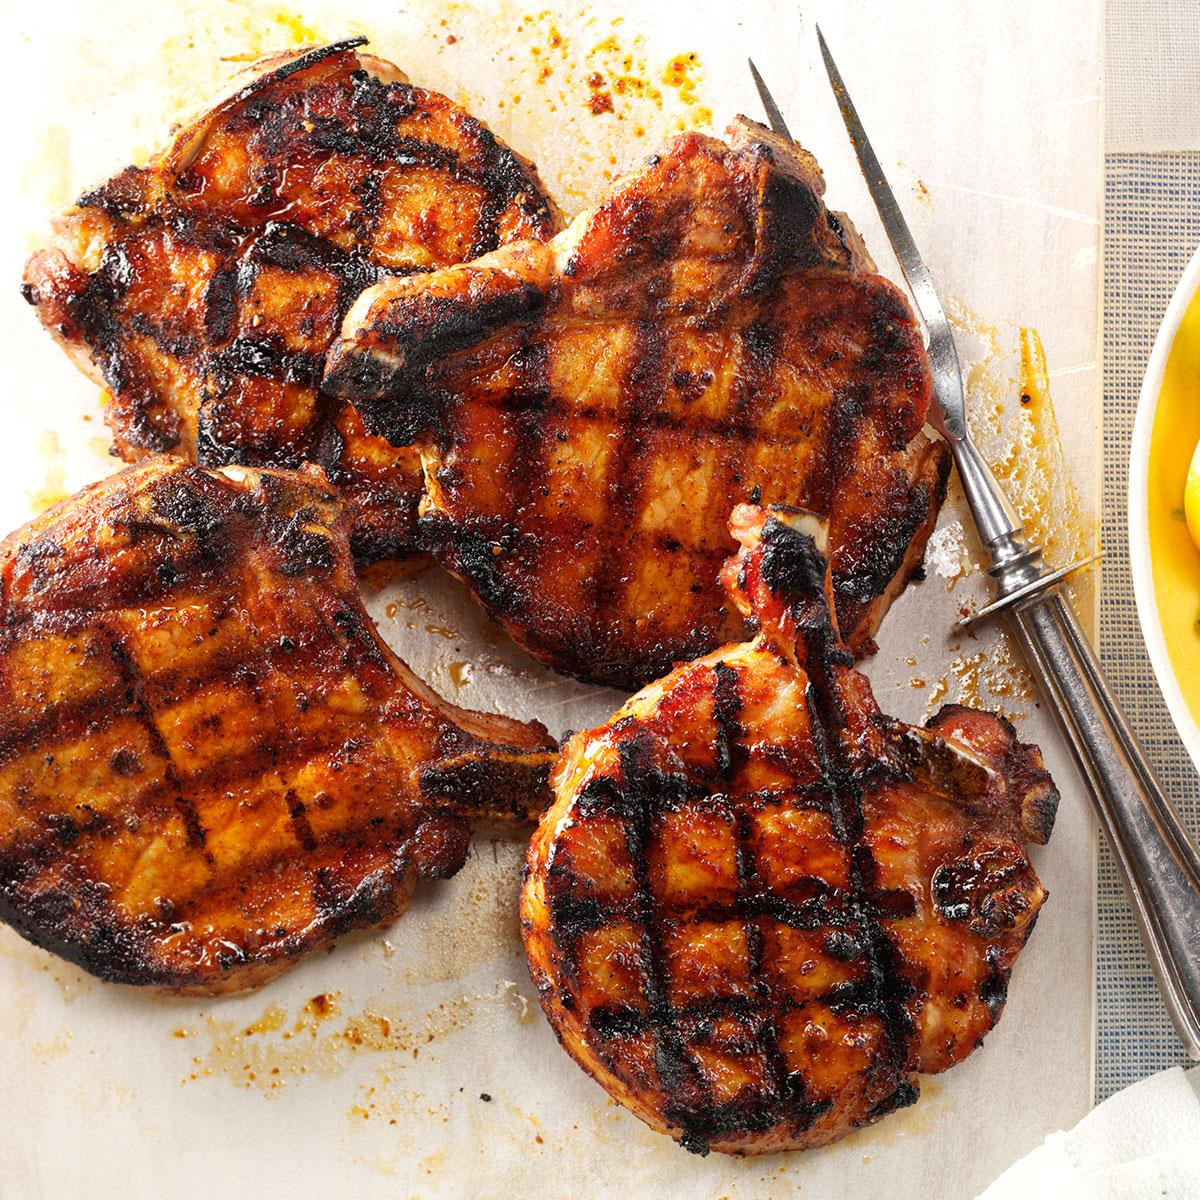 Pork Chops On The Grill Recipes
 Ultimate Grilled Pork Chops Recipe